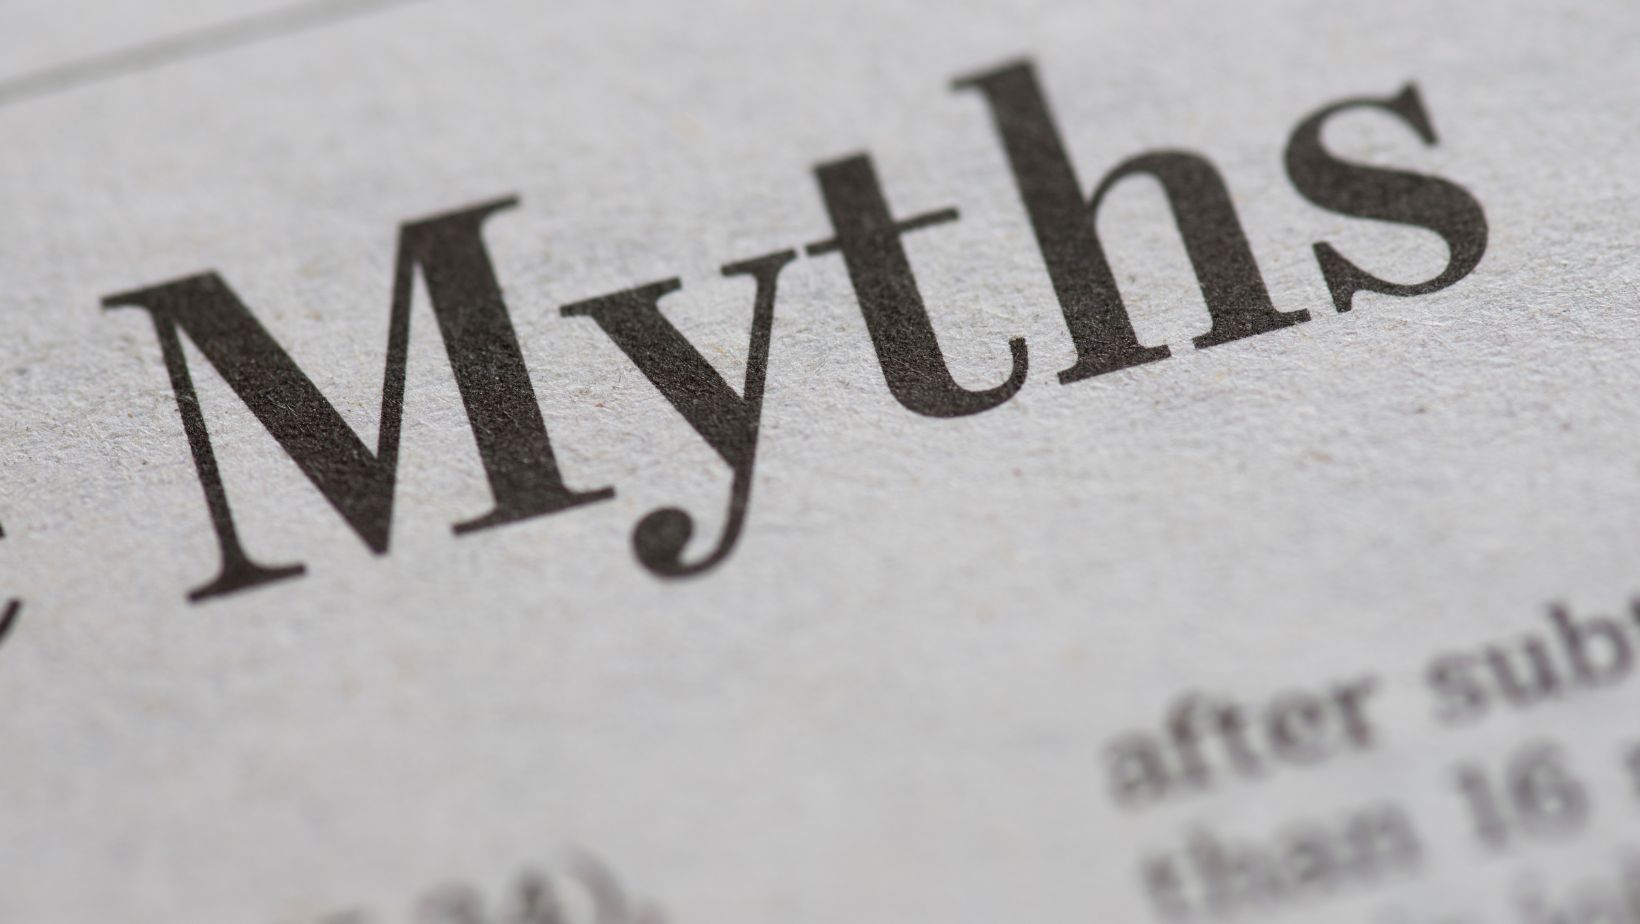 which phrase from the passage refers to a key element found in myths?